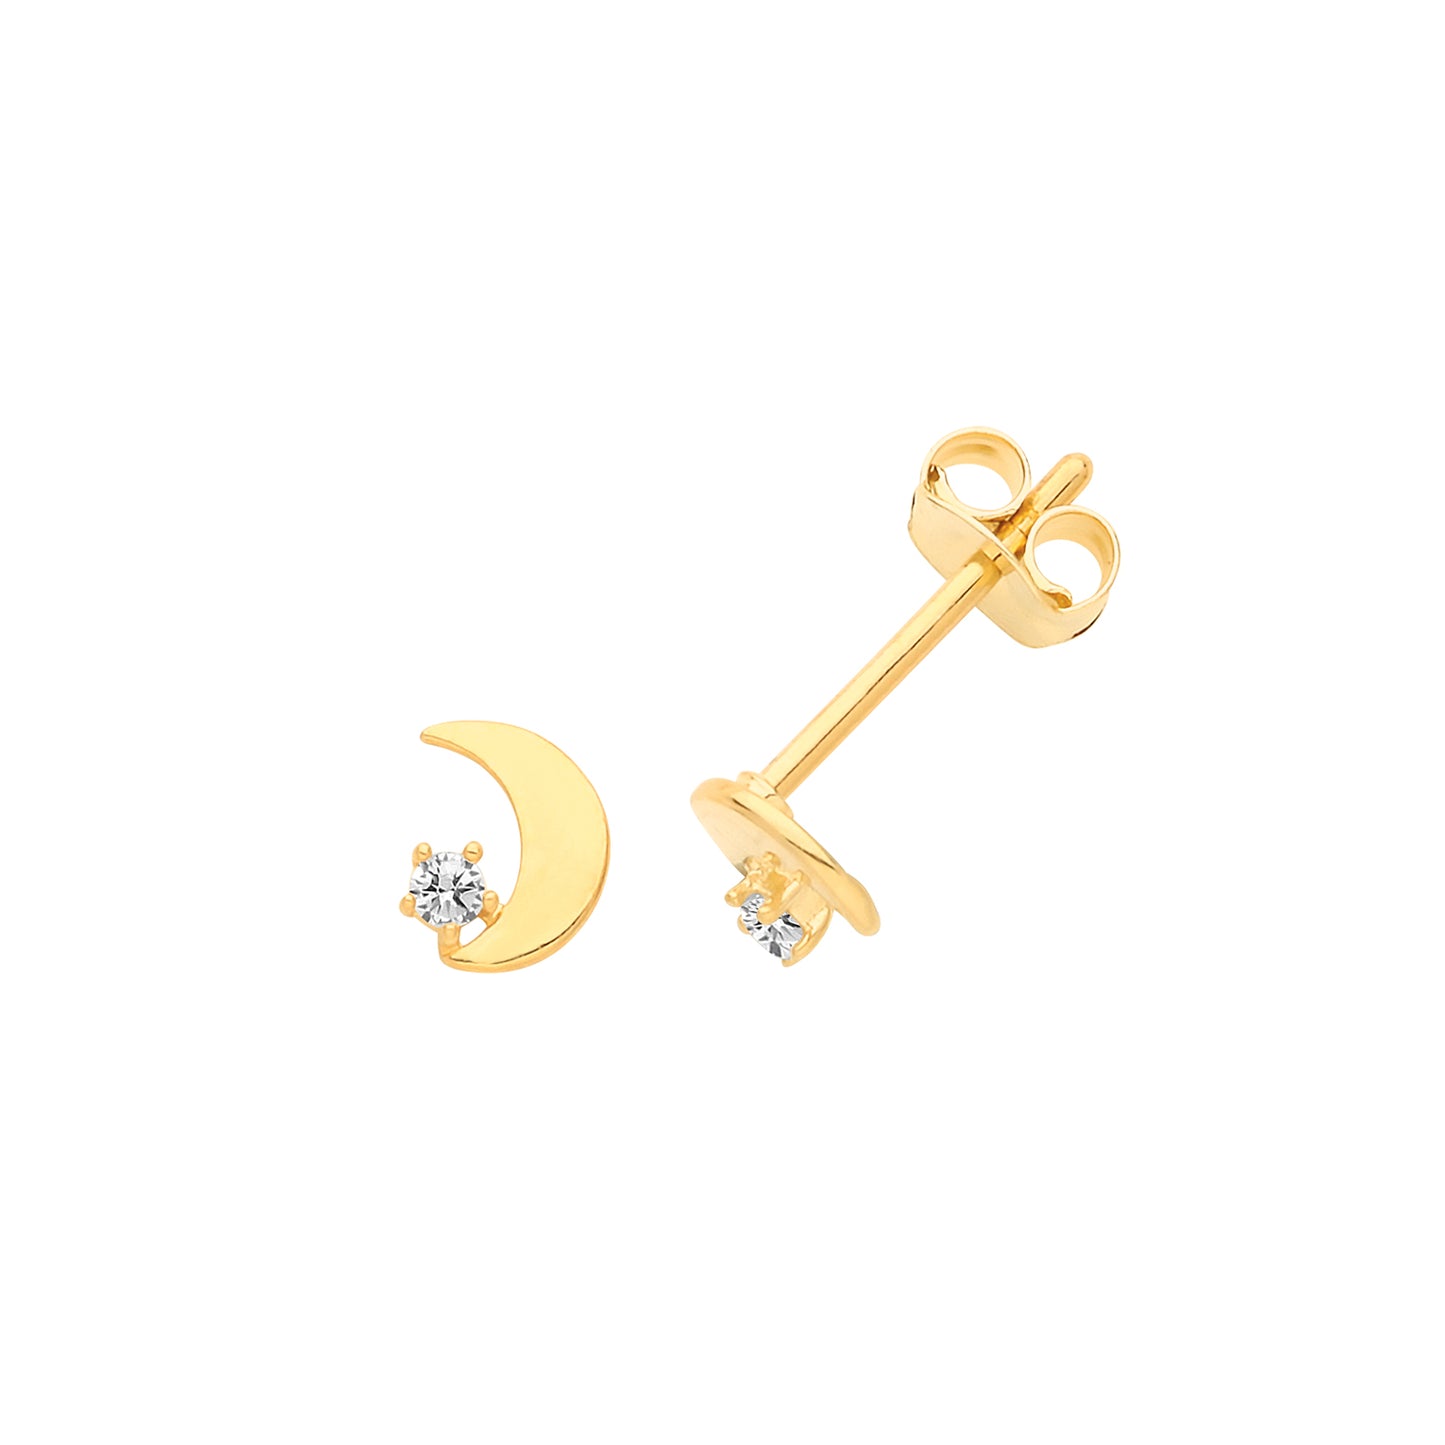 A 9ct yellow gold crescent moon set with cubic zirconia stones, these are a beautiful every day earring that can easily be taken to evening wear. A lovely addition to your jewellery collection.    Product details Product materials : 9ct gold, cubic zirconia